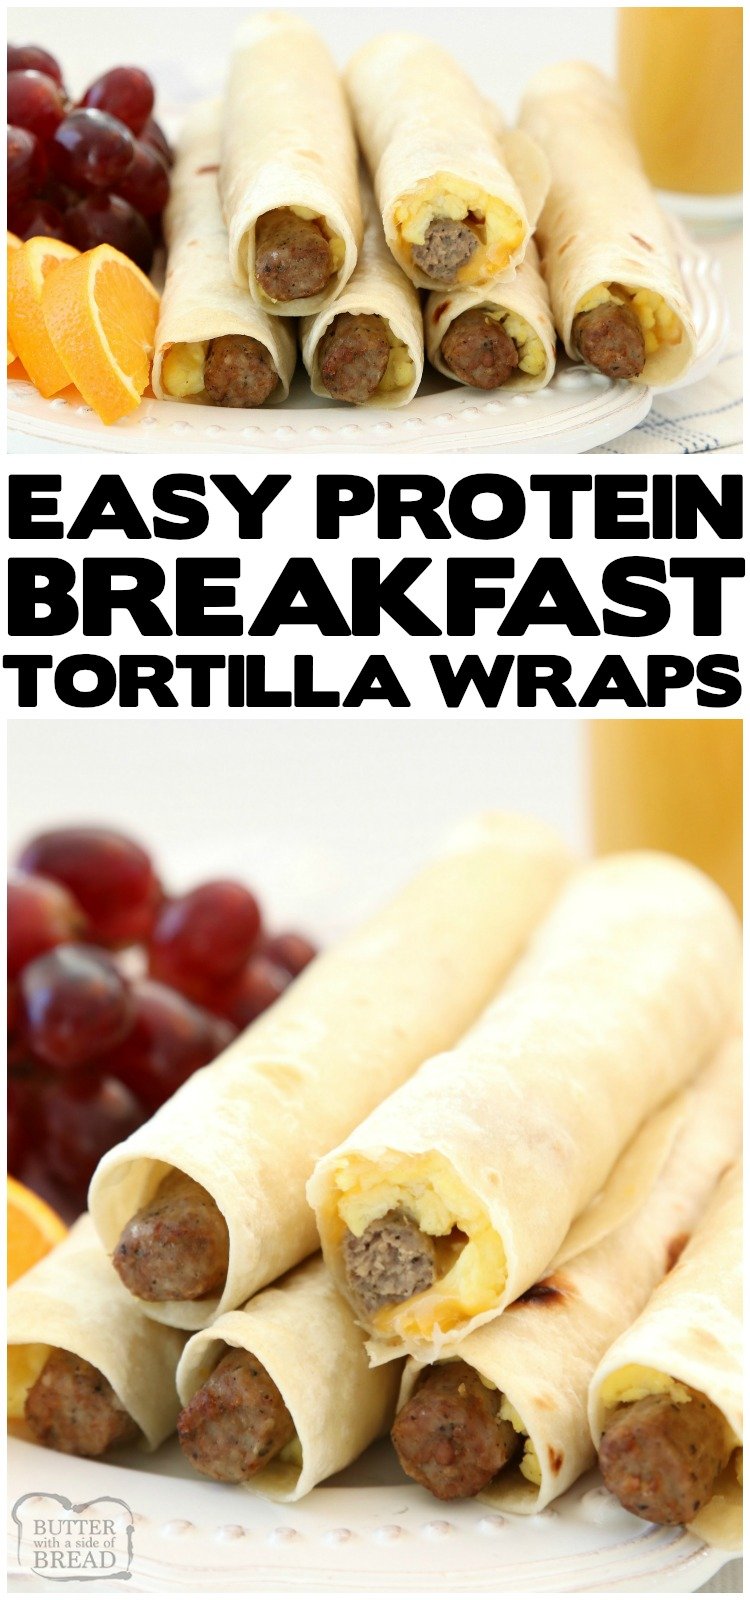 High Protein Breakfast Wraps made with turkey sausage, eggs and cheese wrapped in a fresh tortilla. Easy on the go breakfast idea that's delicious and & satisfying for everyone!